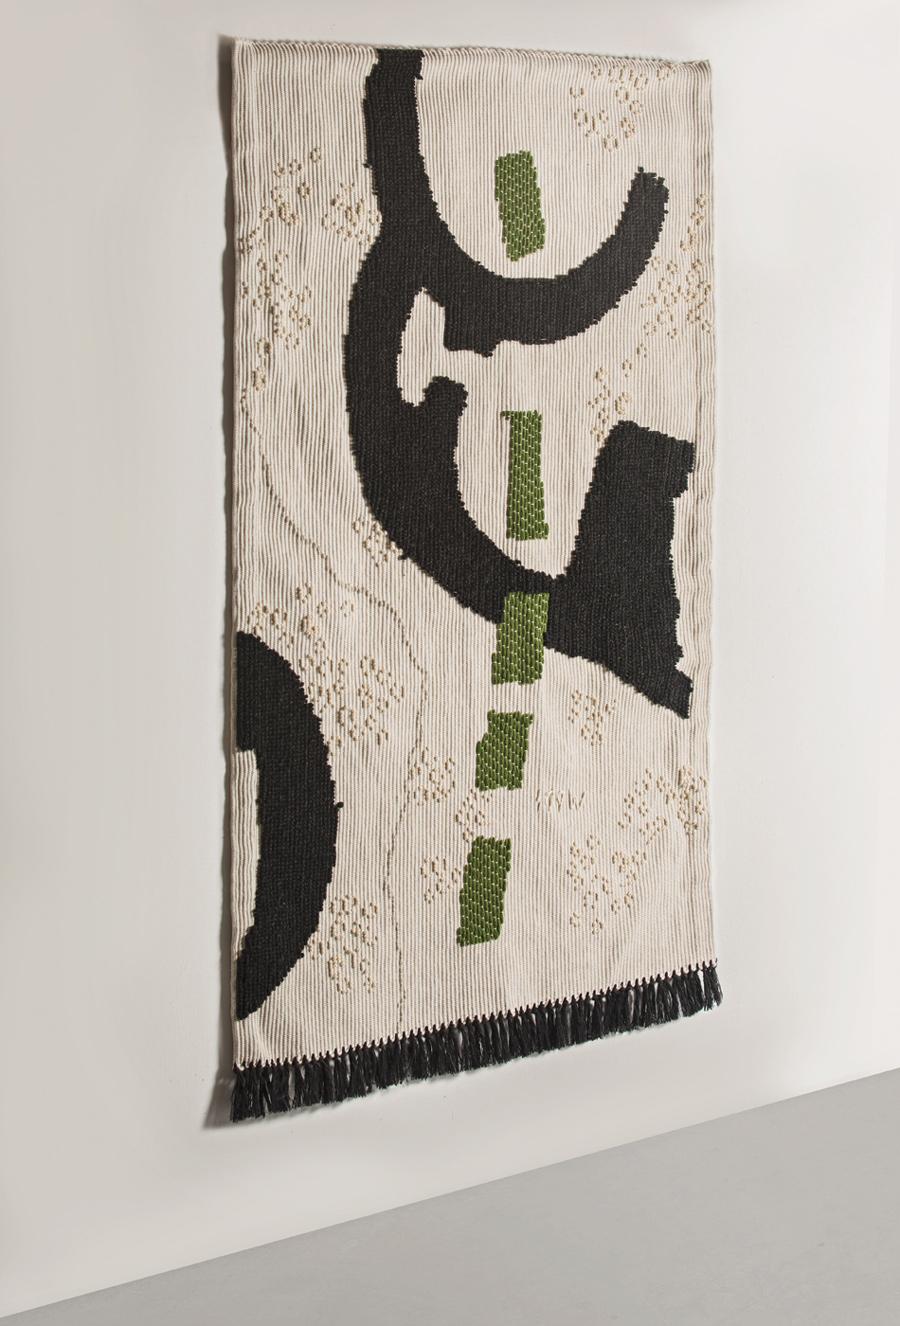 Building on his obsession with ancient cultures and the way in which prehistoric objects shaped them, Roberto Sironi has designed two tapestries, Nuragic White and Nuragic Black, that superimpose various aerial views of migration and architectures